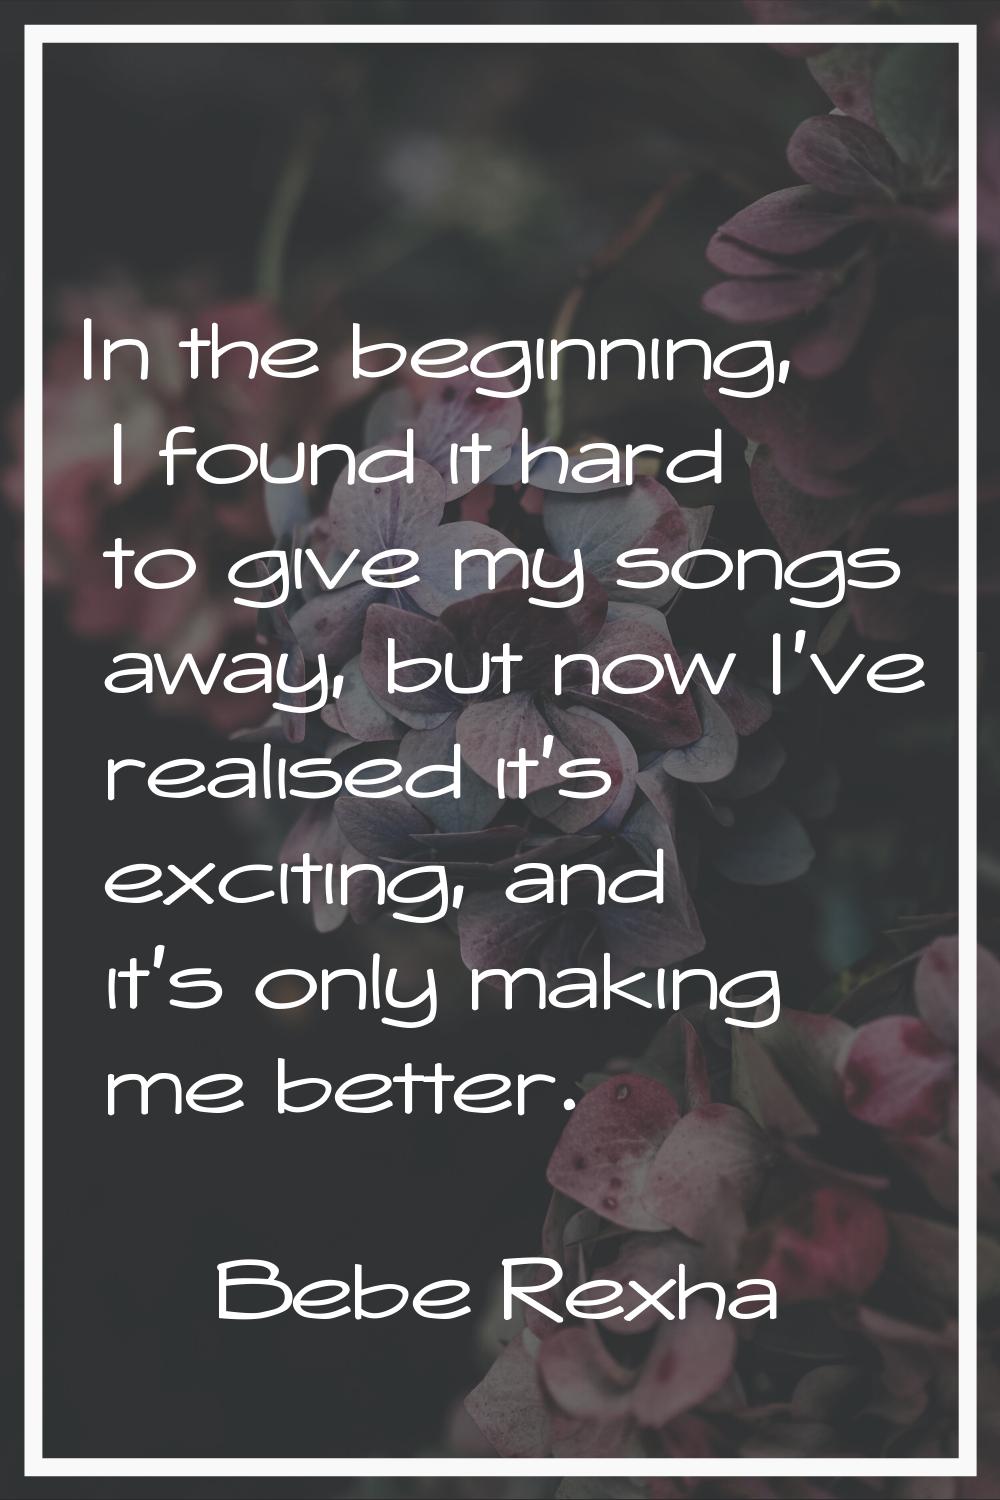 In the beginning, I found it hard to give my songs away, but now I've realised it's exciting, and i